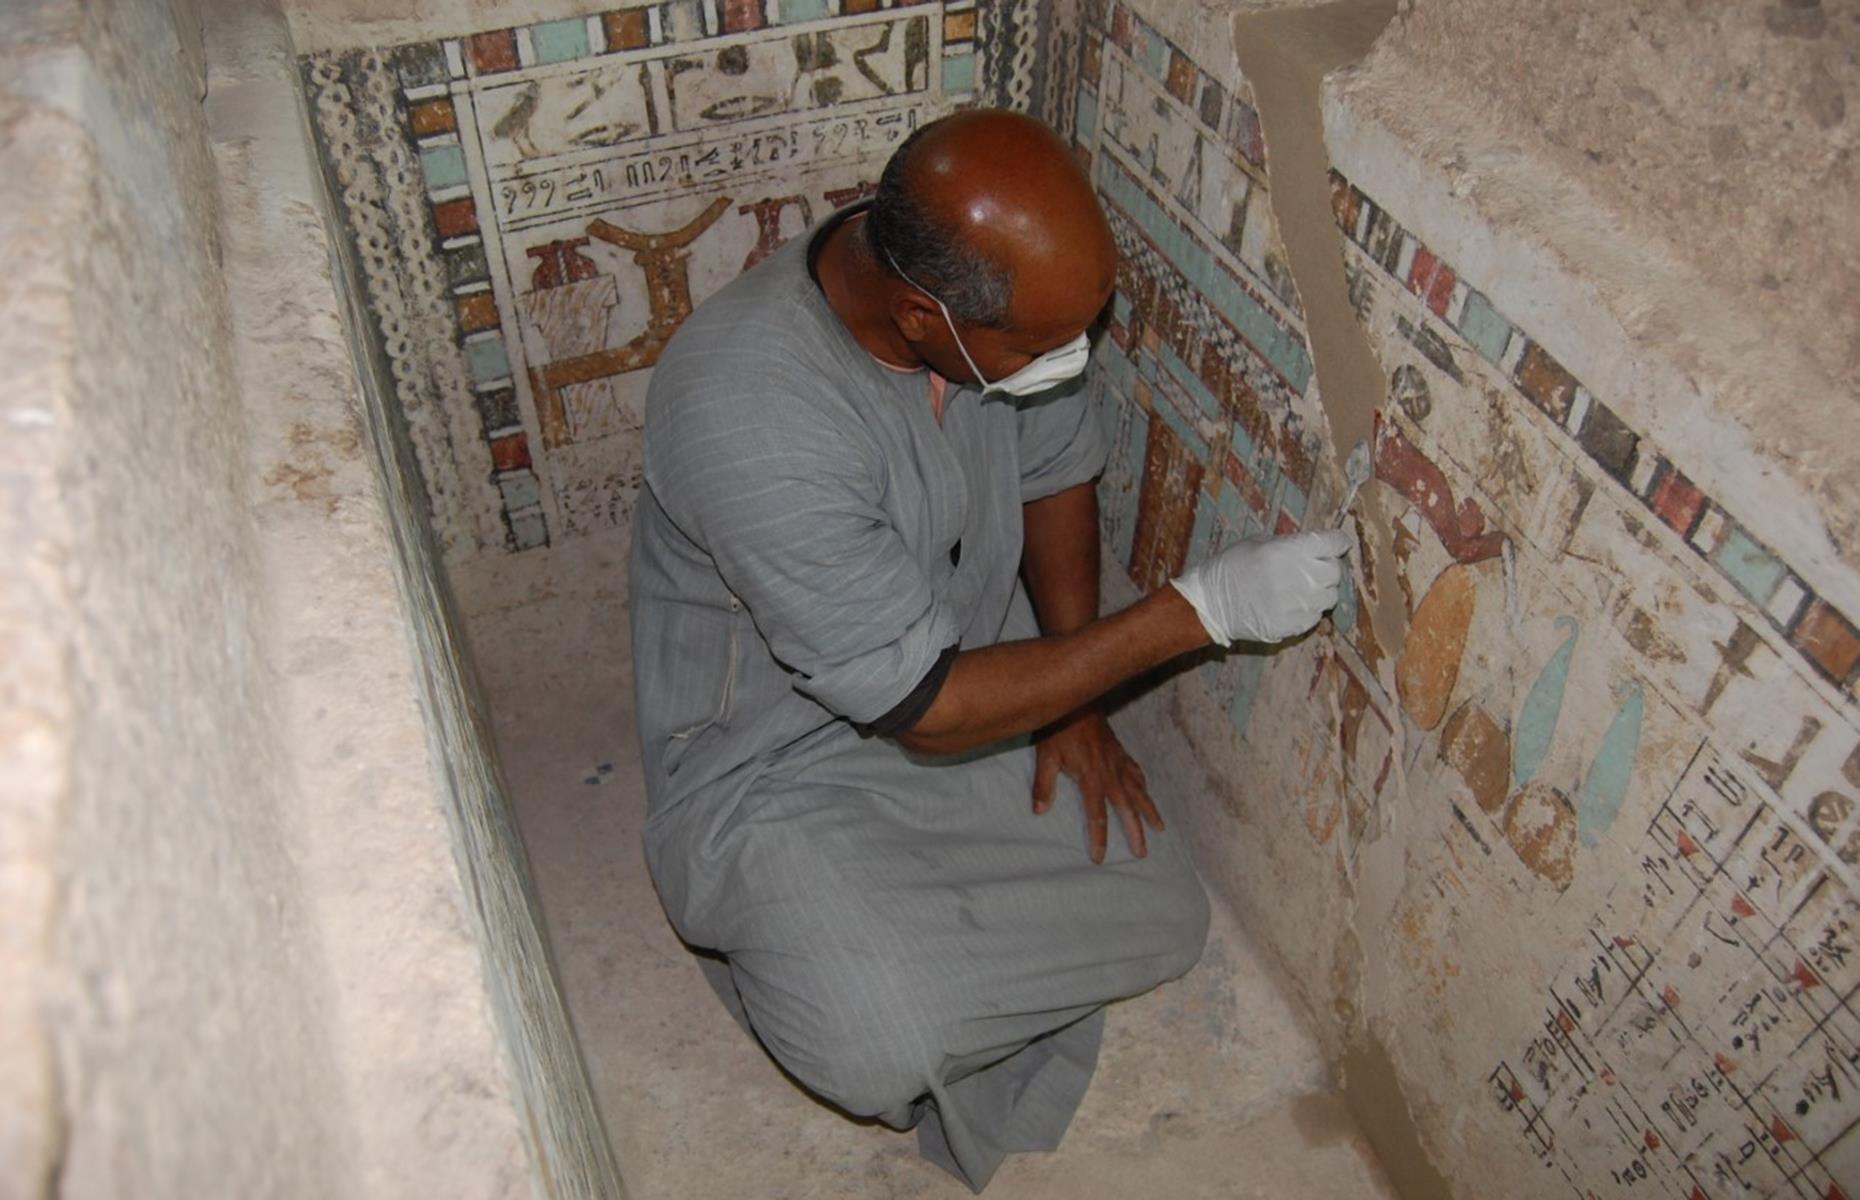 <p>Meru's Tomb was recently restored by a joint team of archaeologists from the Egyptian Ministry of Antiquities and the University of Warsaw, Poland. It's not the first time the tomb has been touched: in 1996, some of the wall paintings were restored by an Italian team. The wall paintings are especially significant, because the technique of painting directly onto lime plaster is unusual.</p>